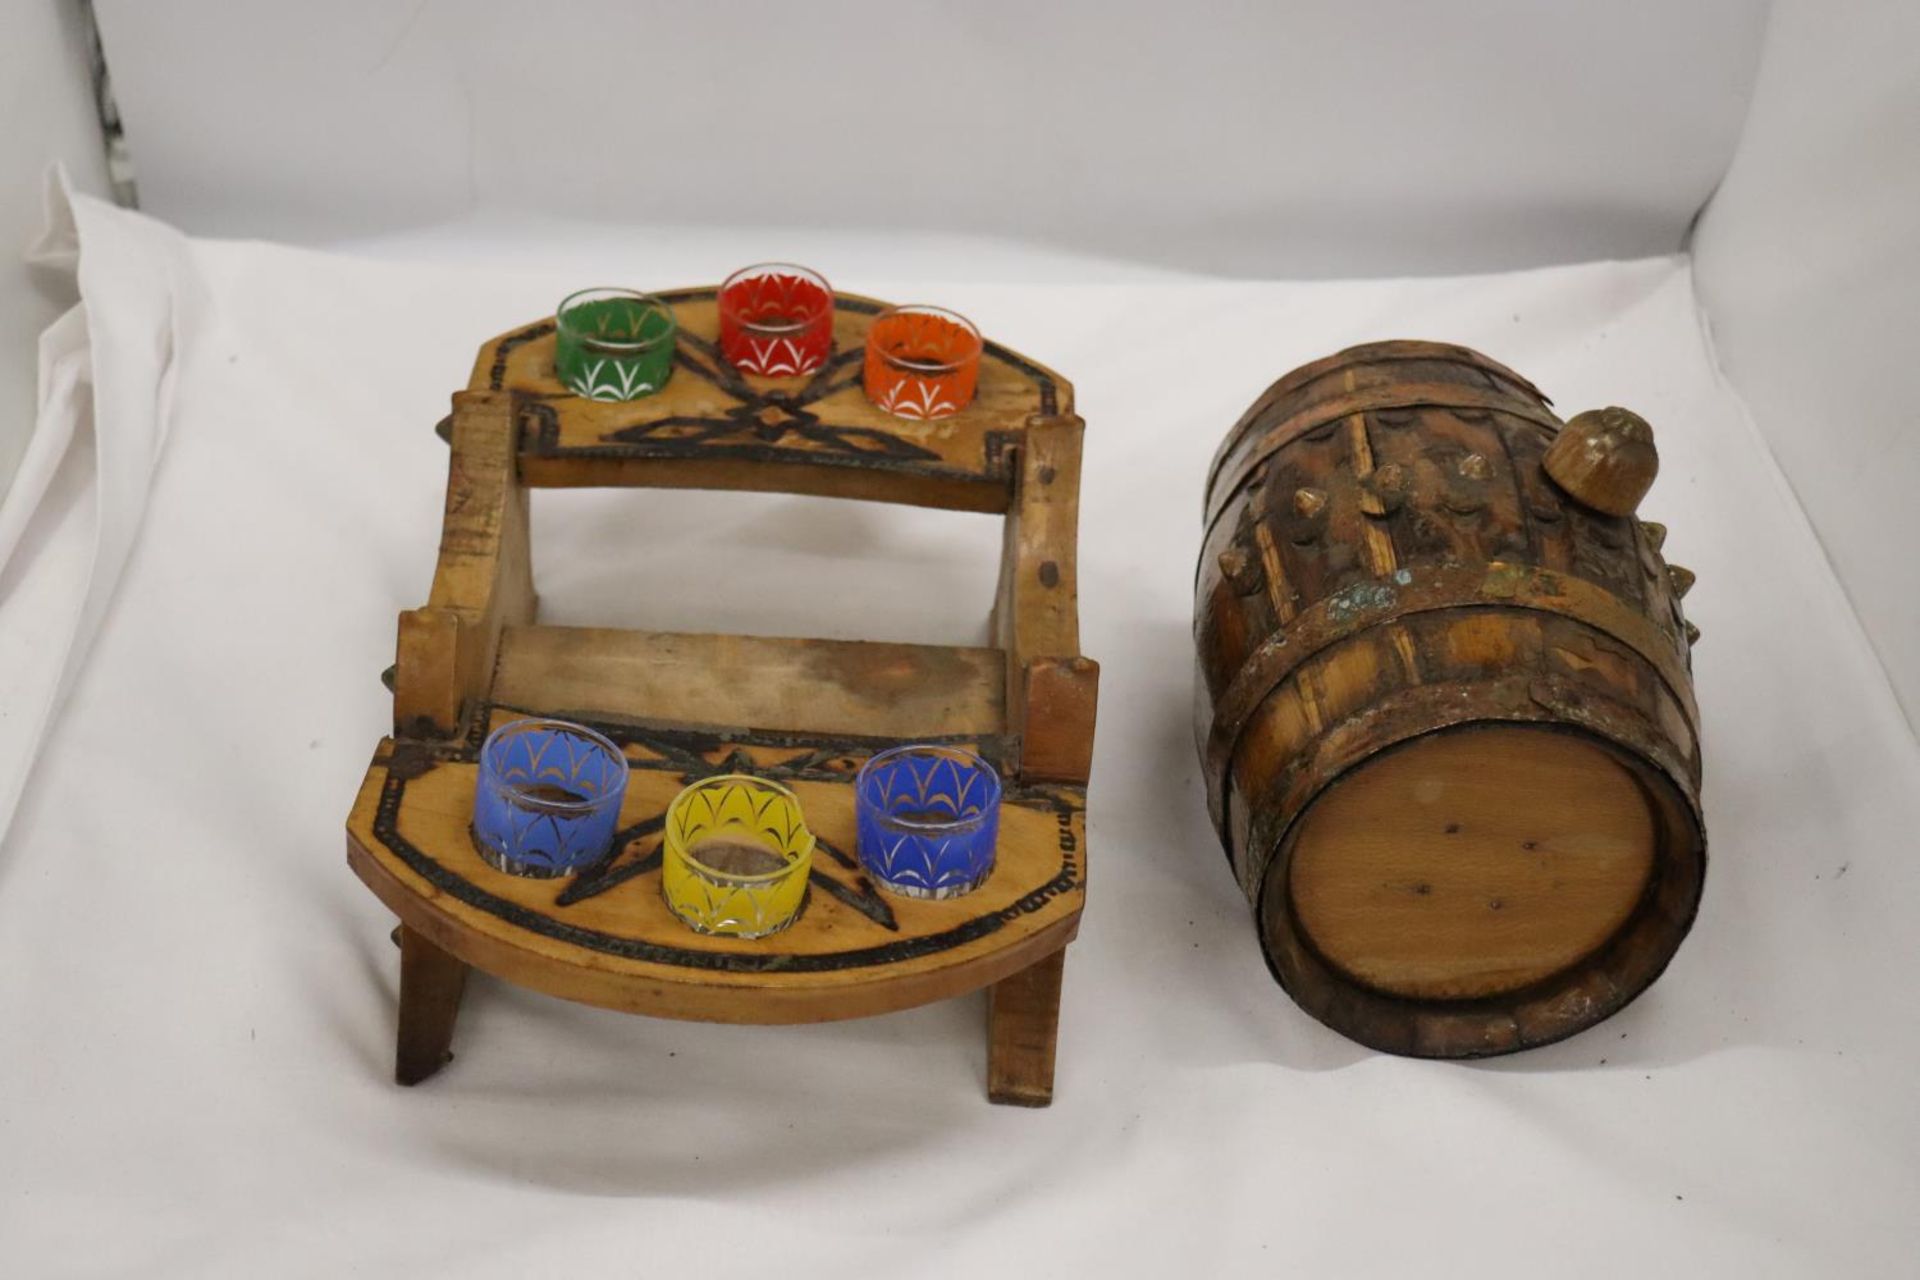 A SMALL VINTAGE BARREL WITH SIX GLASSES - 1 A/F - Image 5 of 5